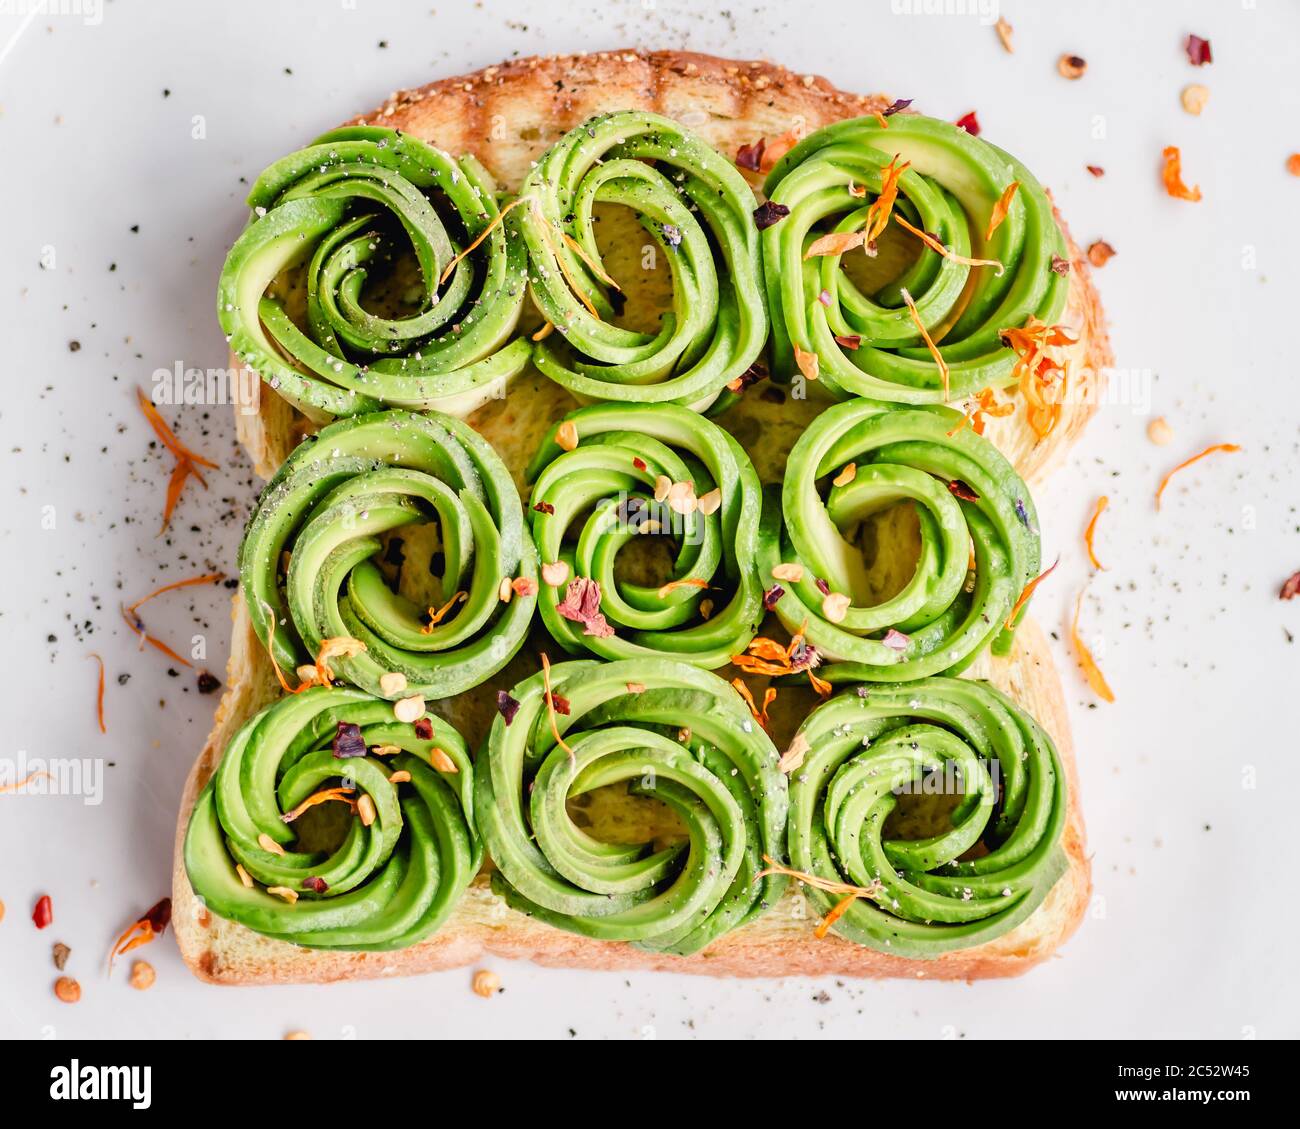 Toast with avocado roses, chilli flakes and edible flowers Stock Photo